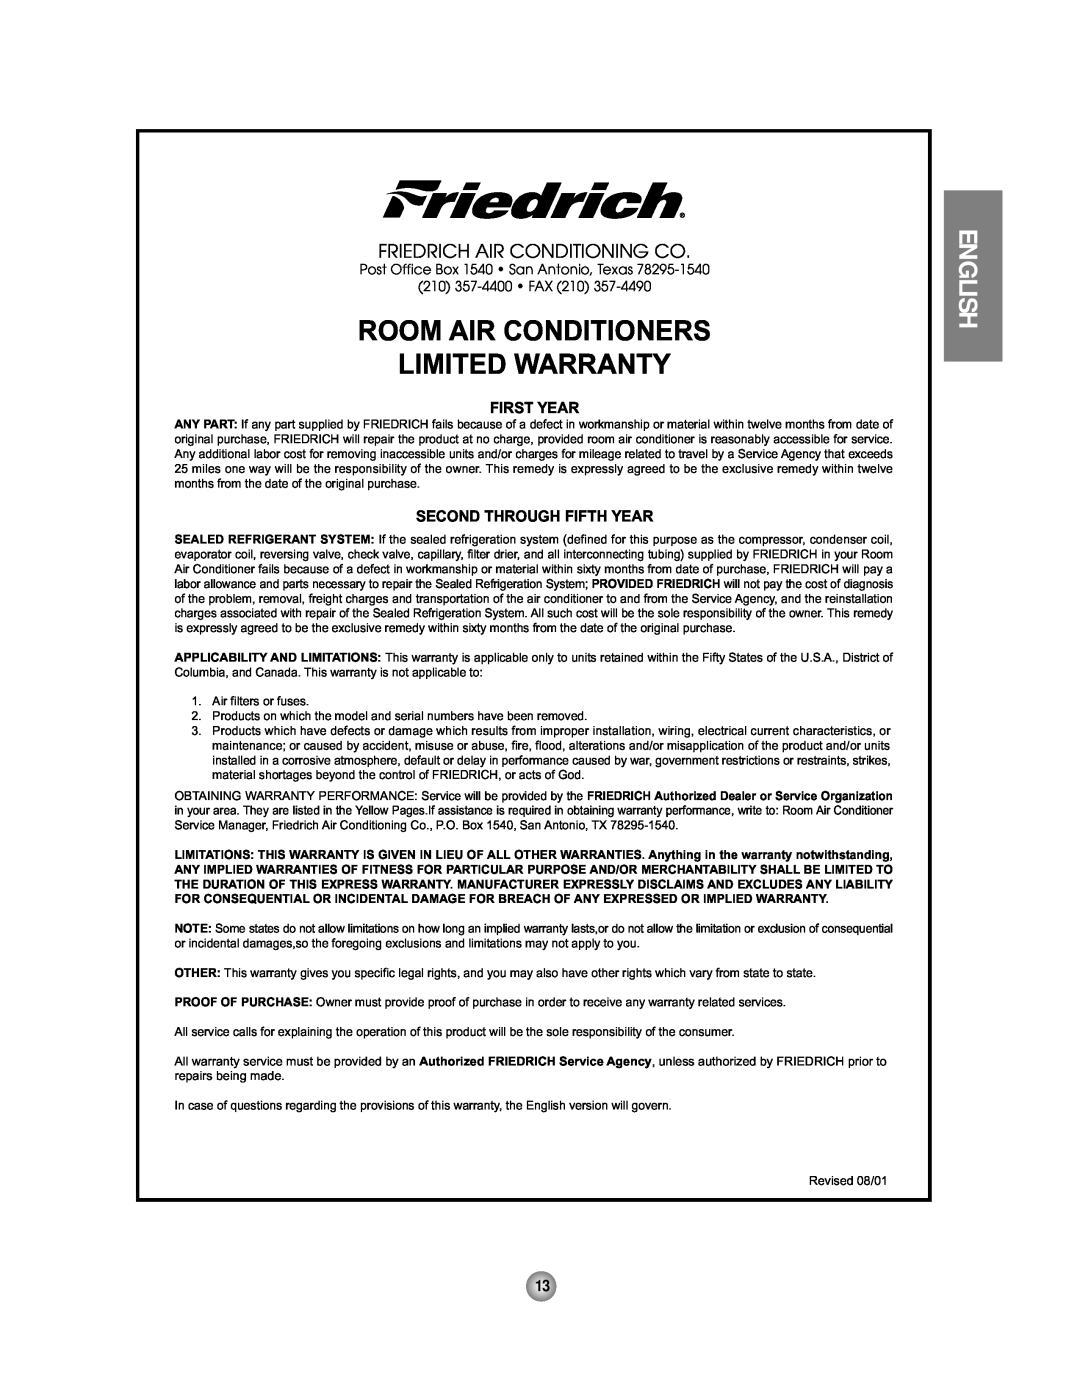 Friedrich CP06 manual Room Air Conditioners Limited Warranty, Friedrich Air Conditioning Co, English, First Year 